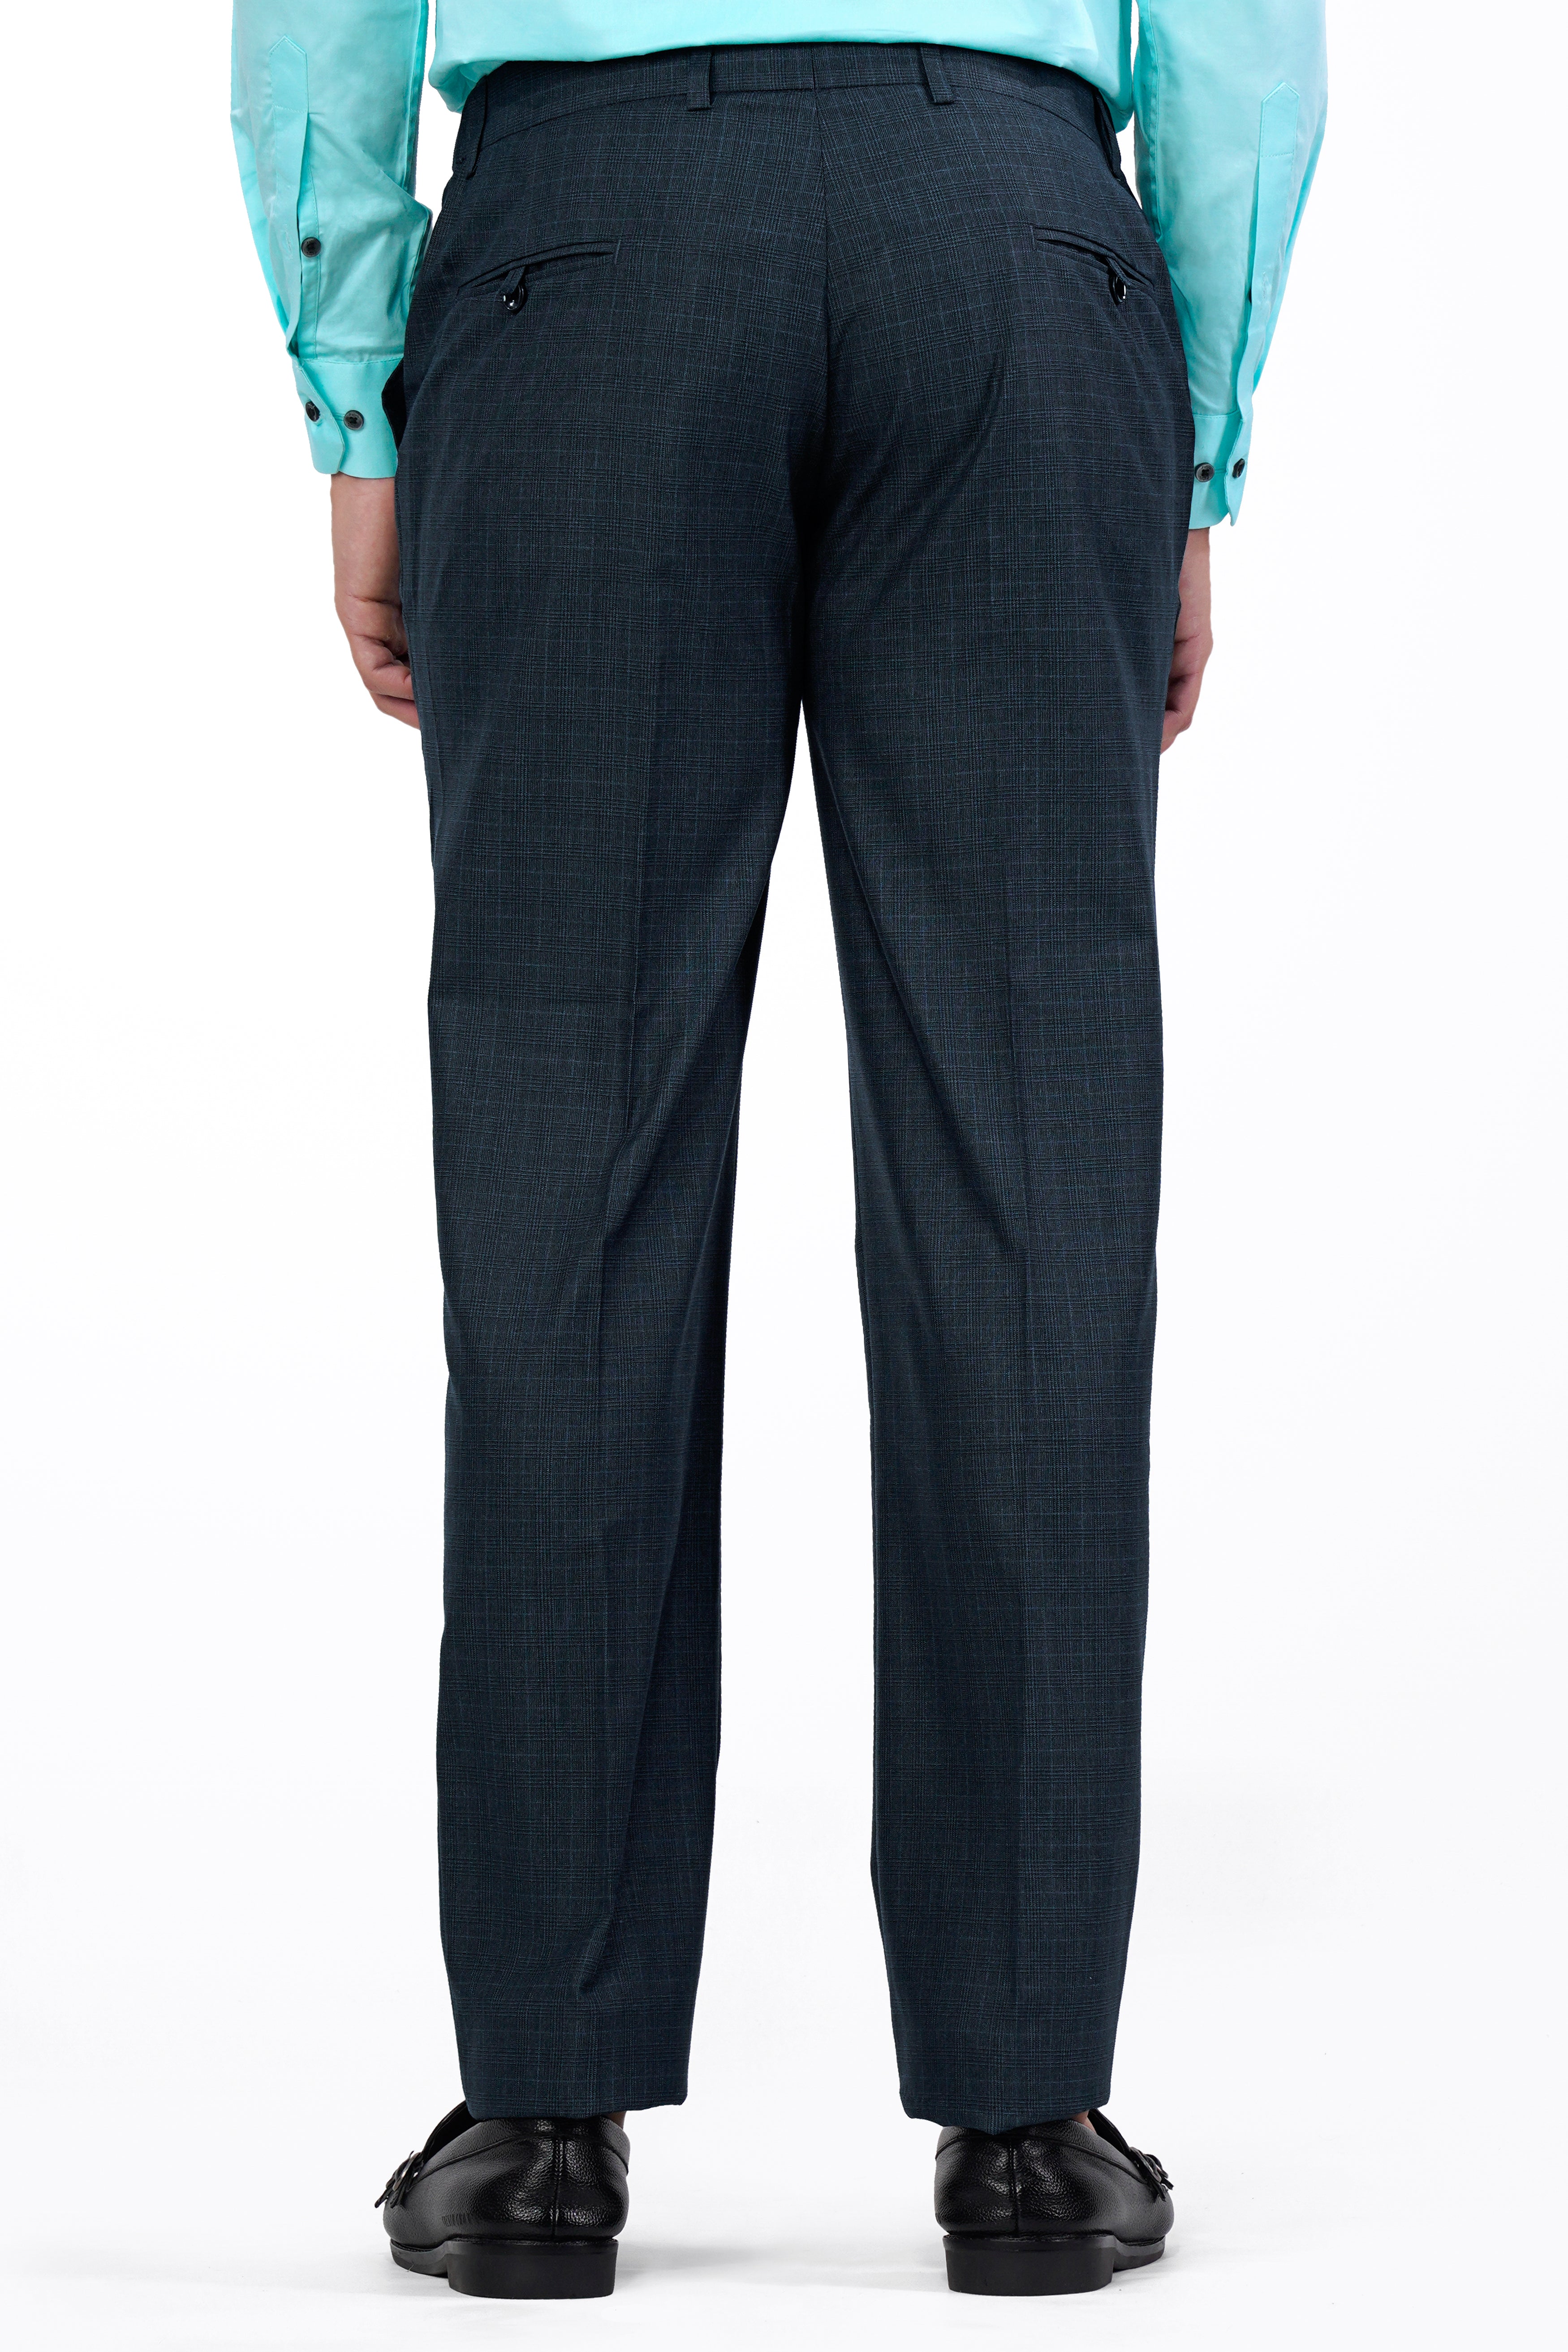 Charade Blue Wool Rich Pant T2911-SW-28, T2911-SW-30, T2911-SW-32, T2911-SW-34, T2911-SW-36, T2911-SW-38, T2911-SW-40, T2911-SW-42, T2911-SW-44